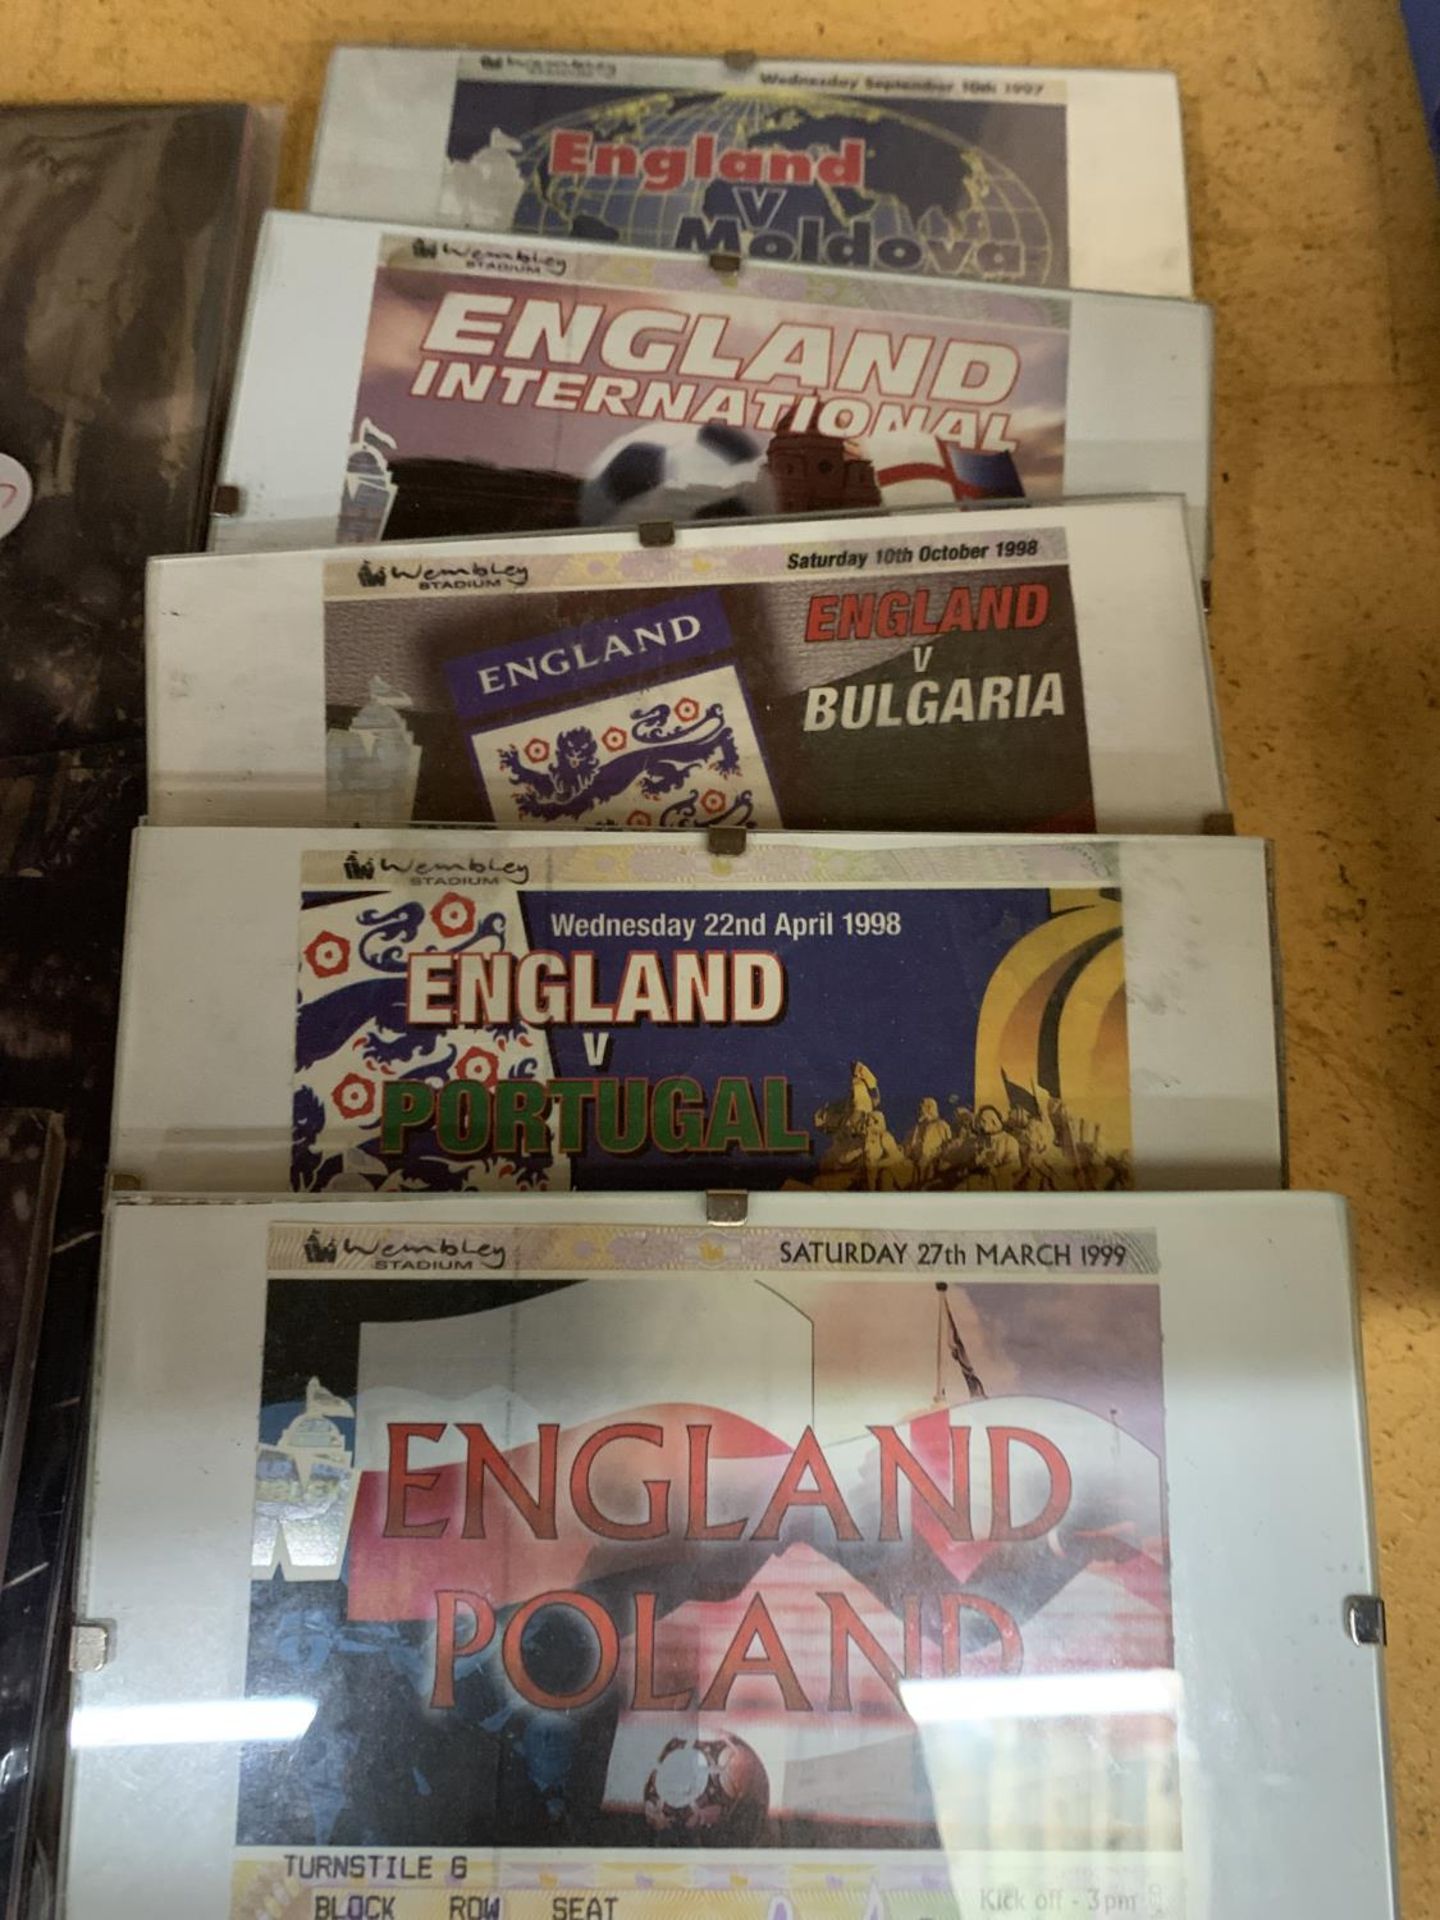 FIVE FRAMED ENGLAND INTERNATIONAL MATCHDAY TICKETS FROM THE 1990'S, PLUS A COMPLETE OFFICIAL COIN - Bild 3 aus 5